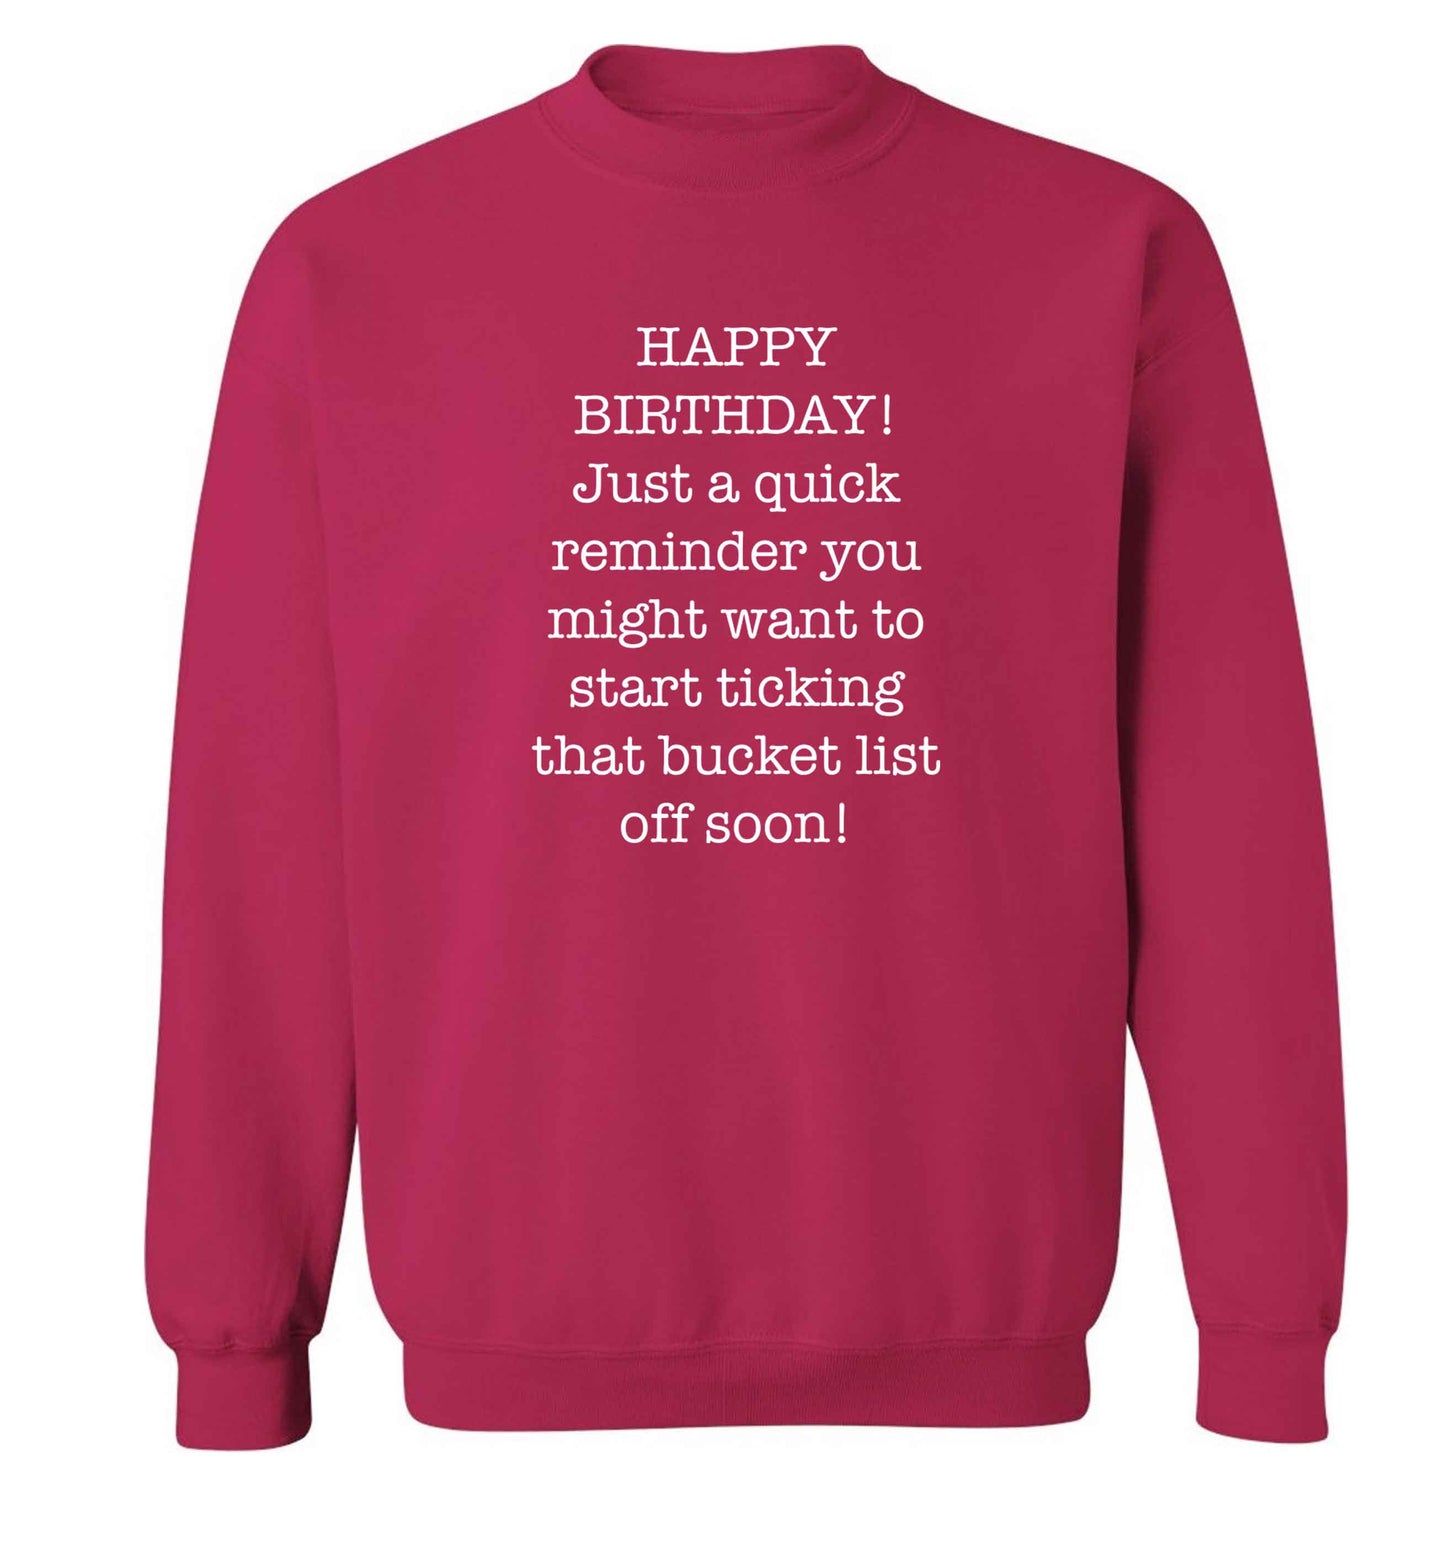 Happy birthday, just a quick reminder you might want to start ticking that bucket list off soon adult's unisex pink sweater 2XL